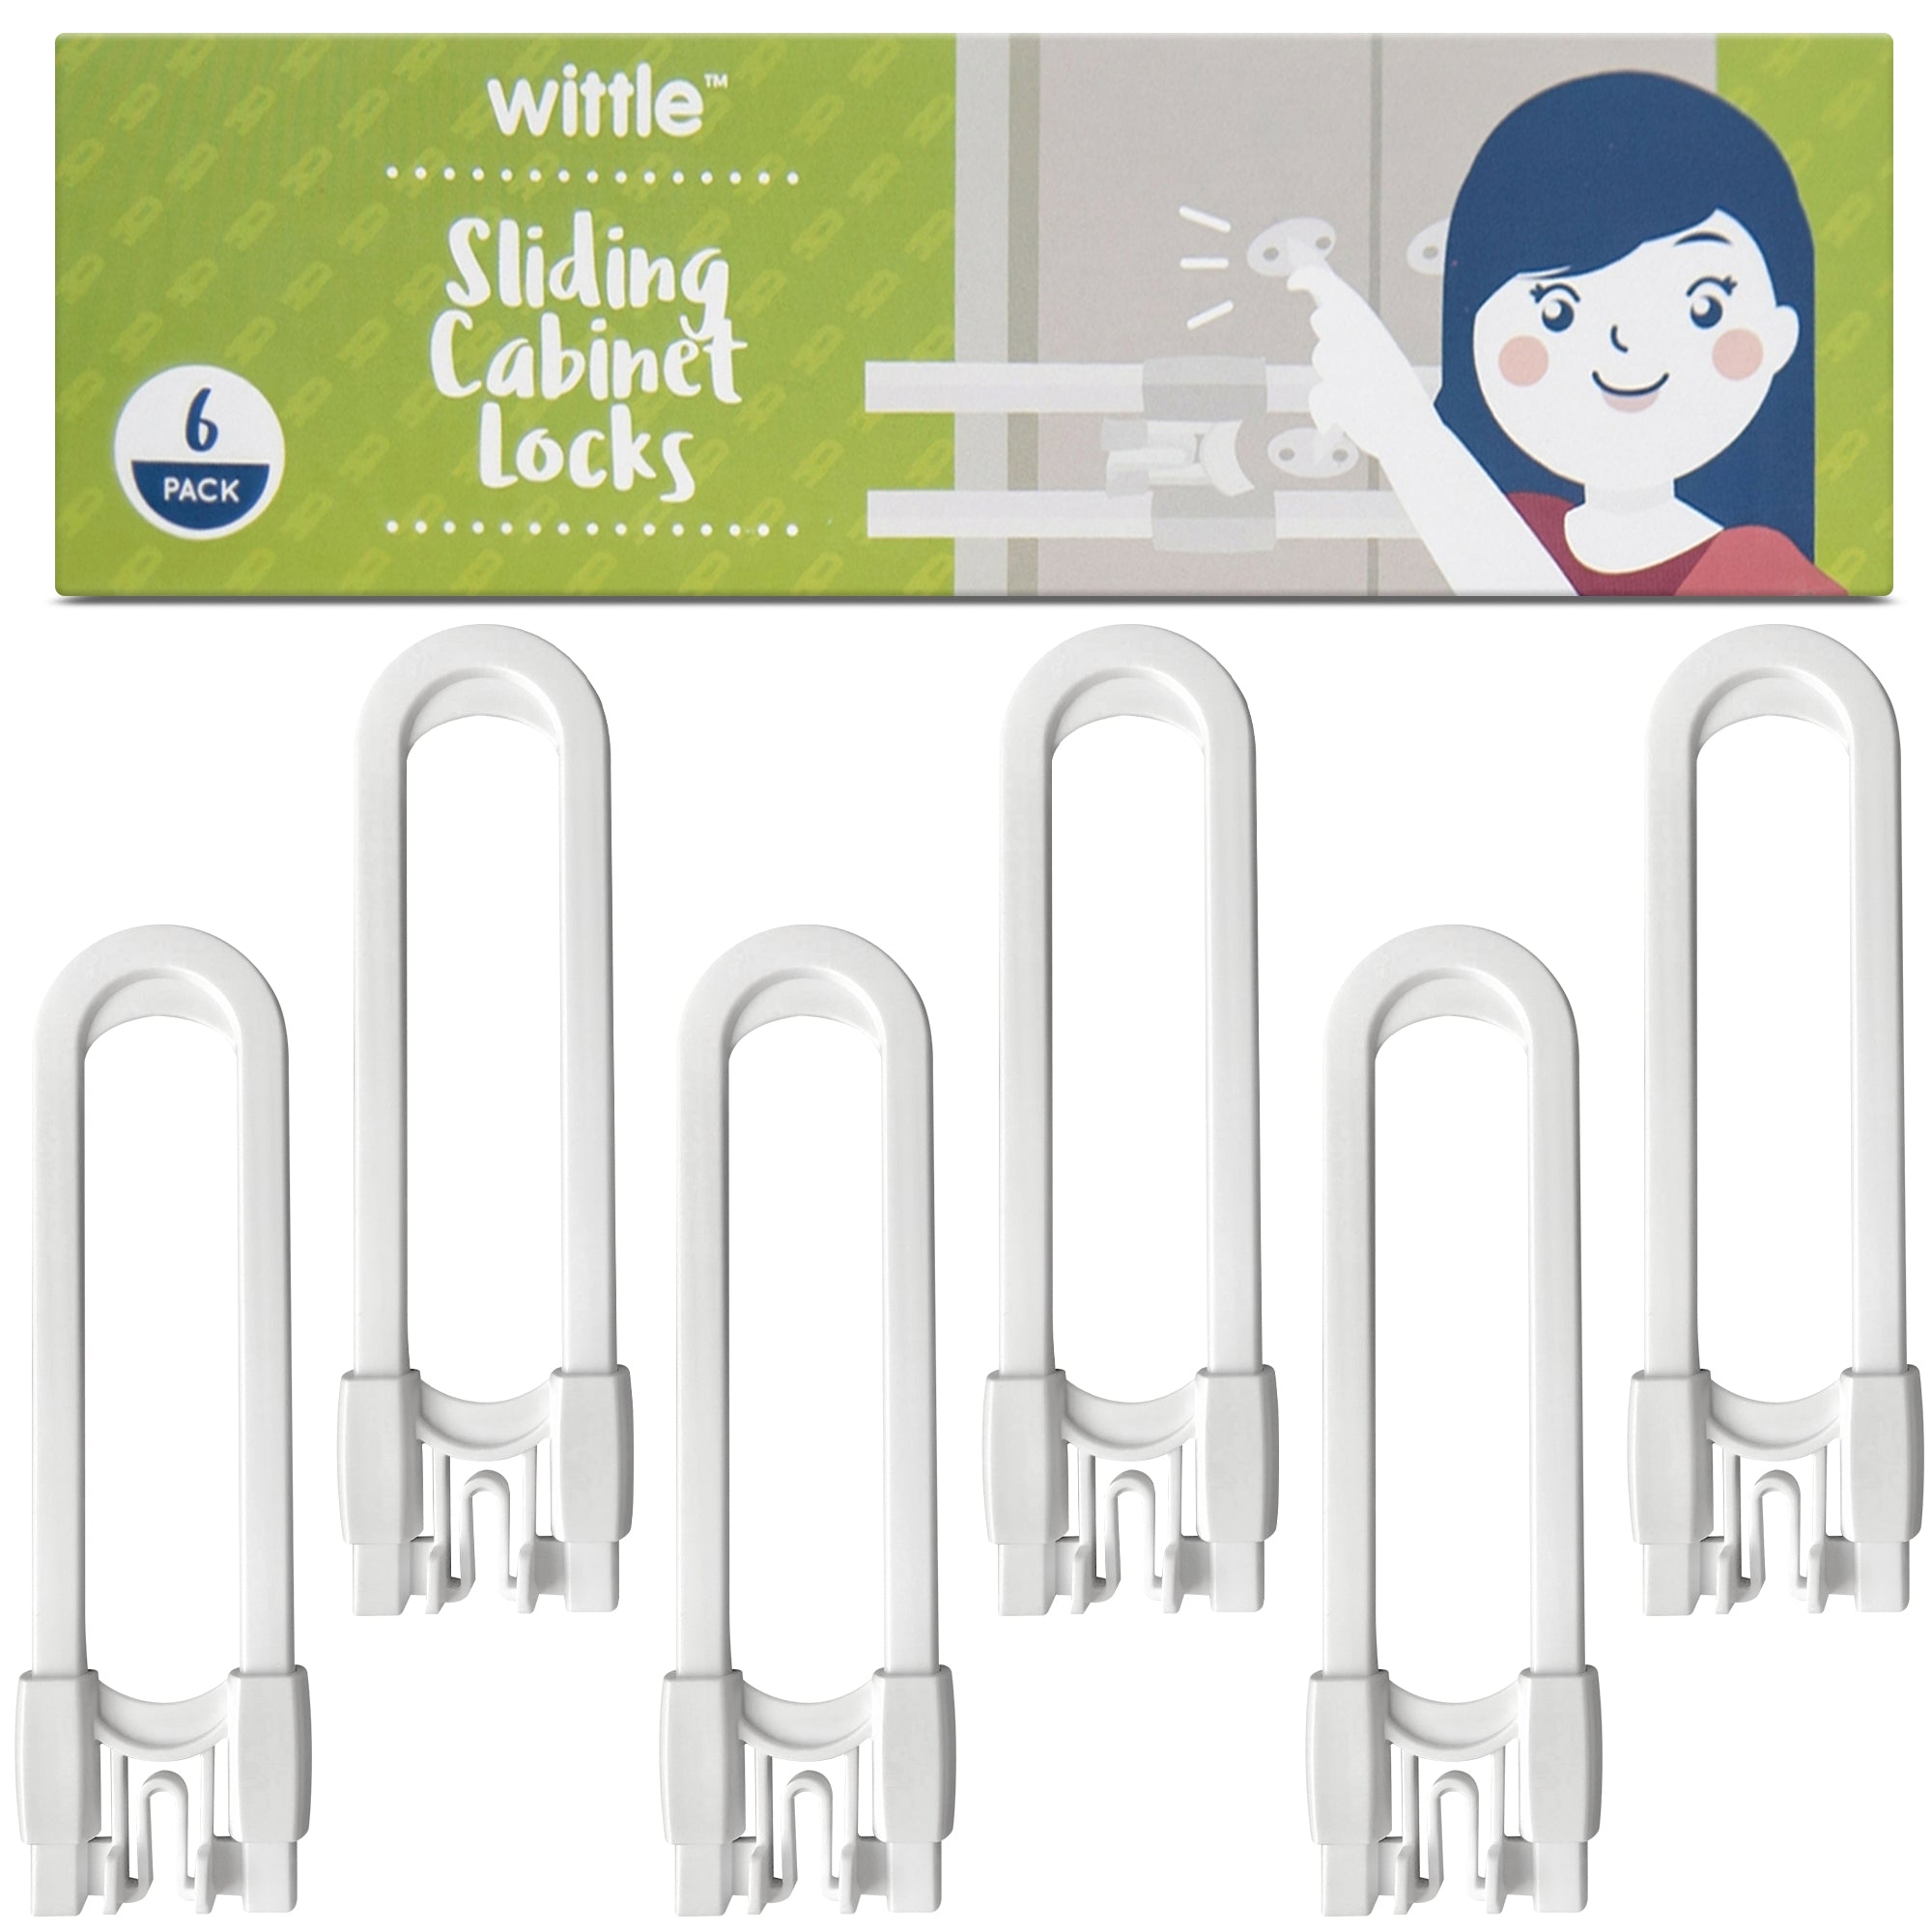 8 Pcs Sliding Cabinet Locks, Baby Proofing Cabinet Locks, Child U-shaped Proofing  Cabinet With Adjustable Safety Child Lock, Childproof Latch For Knob